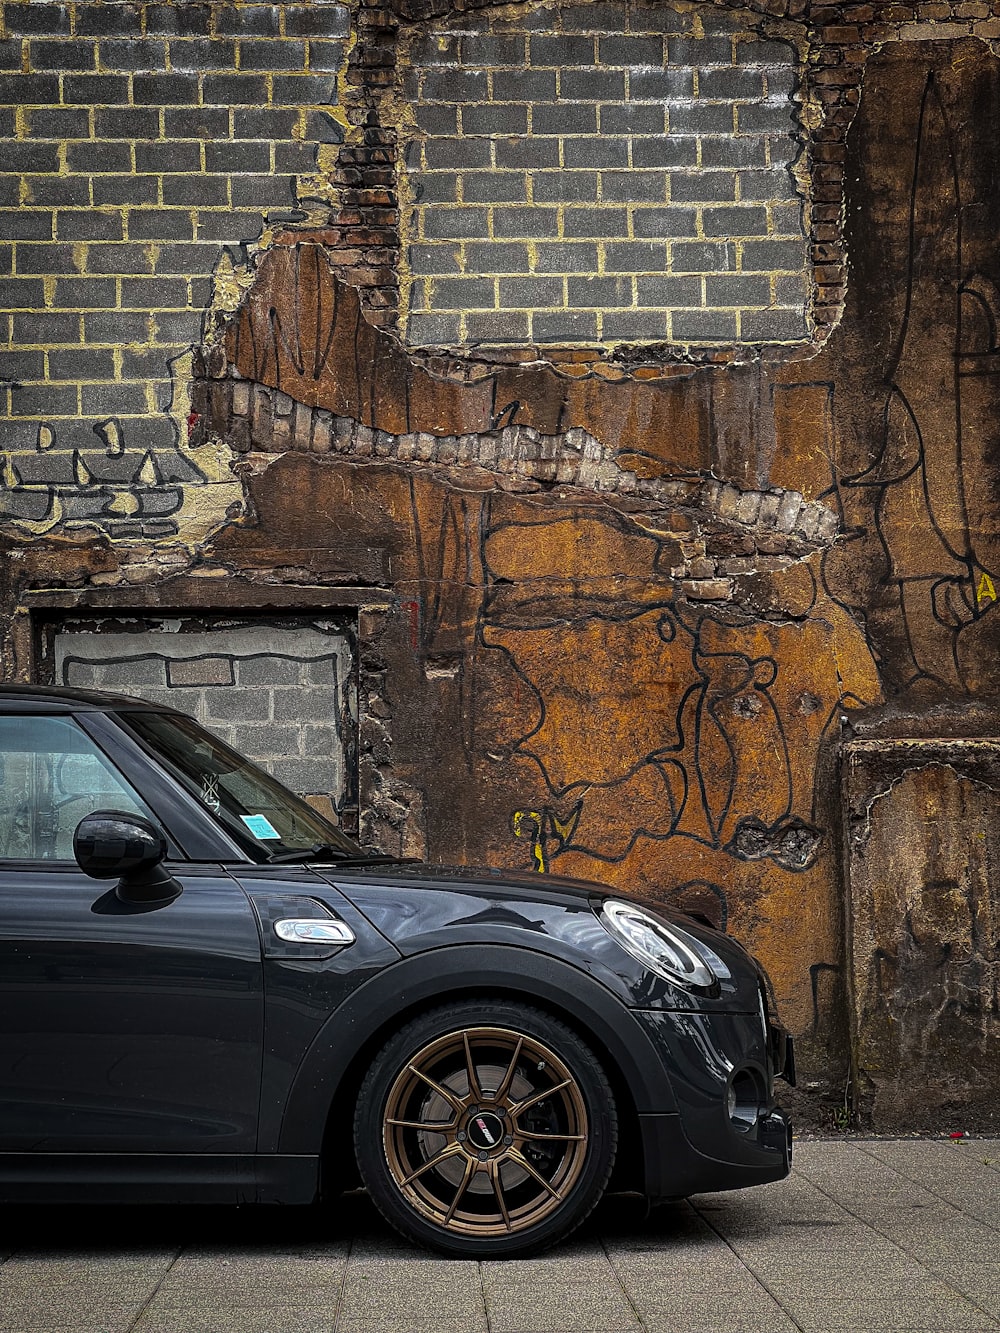 a car parked in front of a brick wall with graffiti on it